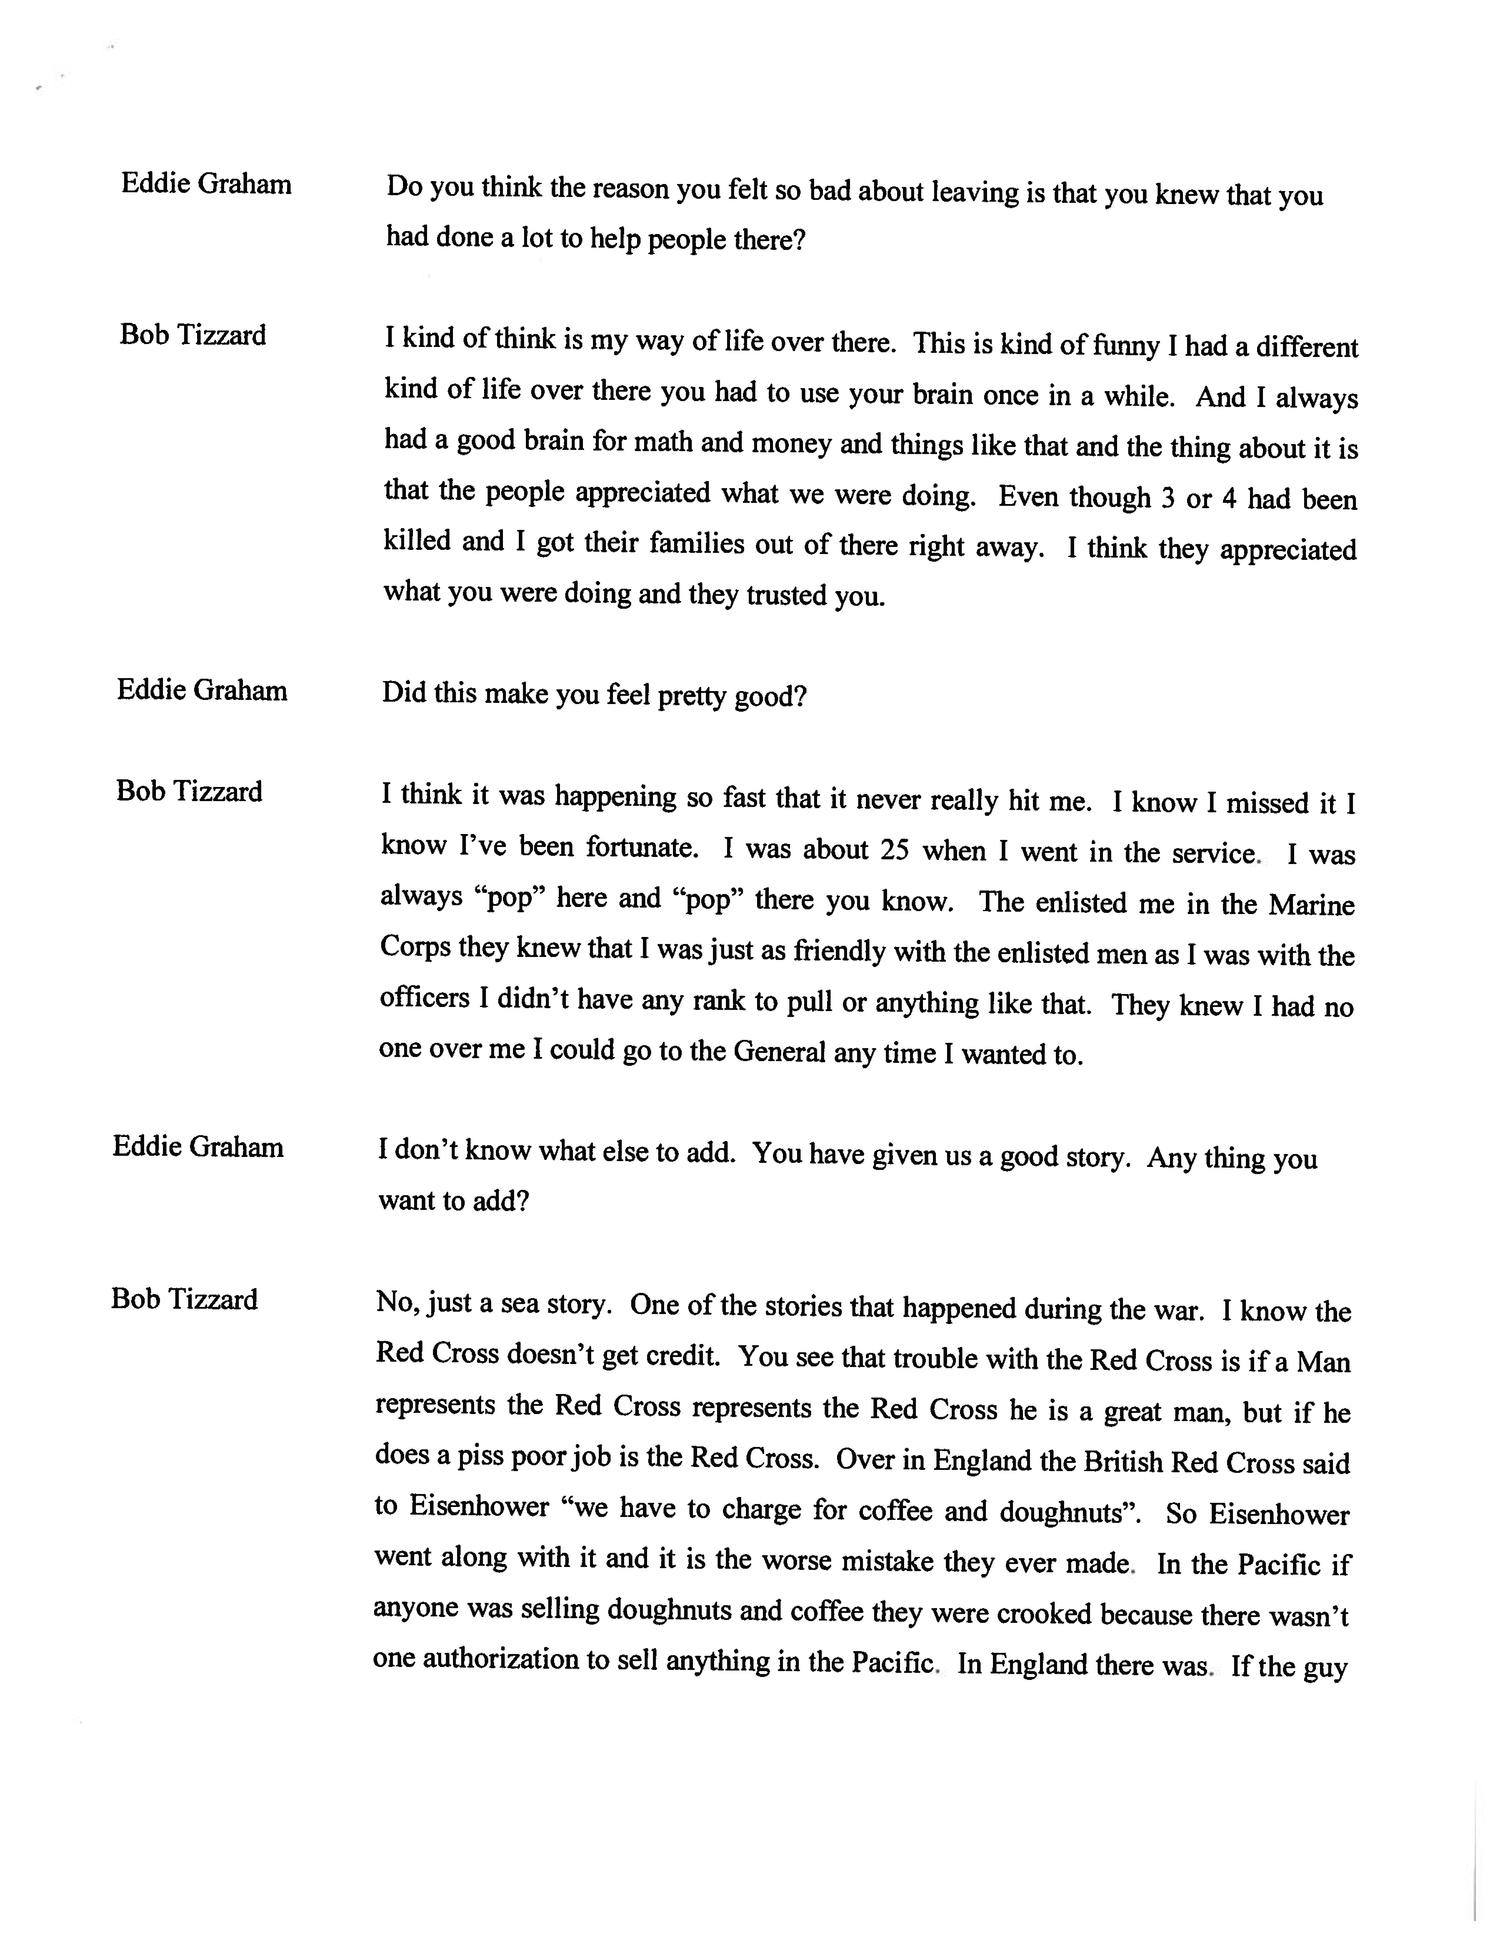 Oral History Interview with Bob Tizzard, September 3, 2004
                                                
                                                    13
                                                